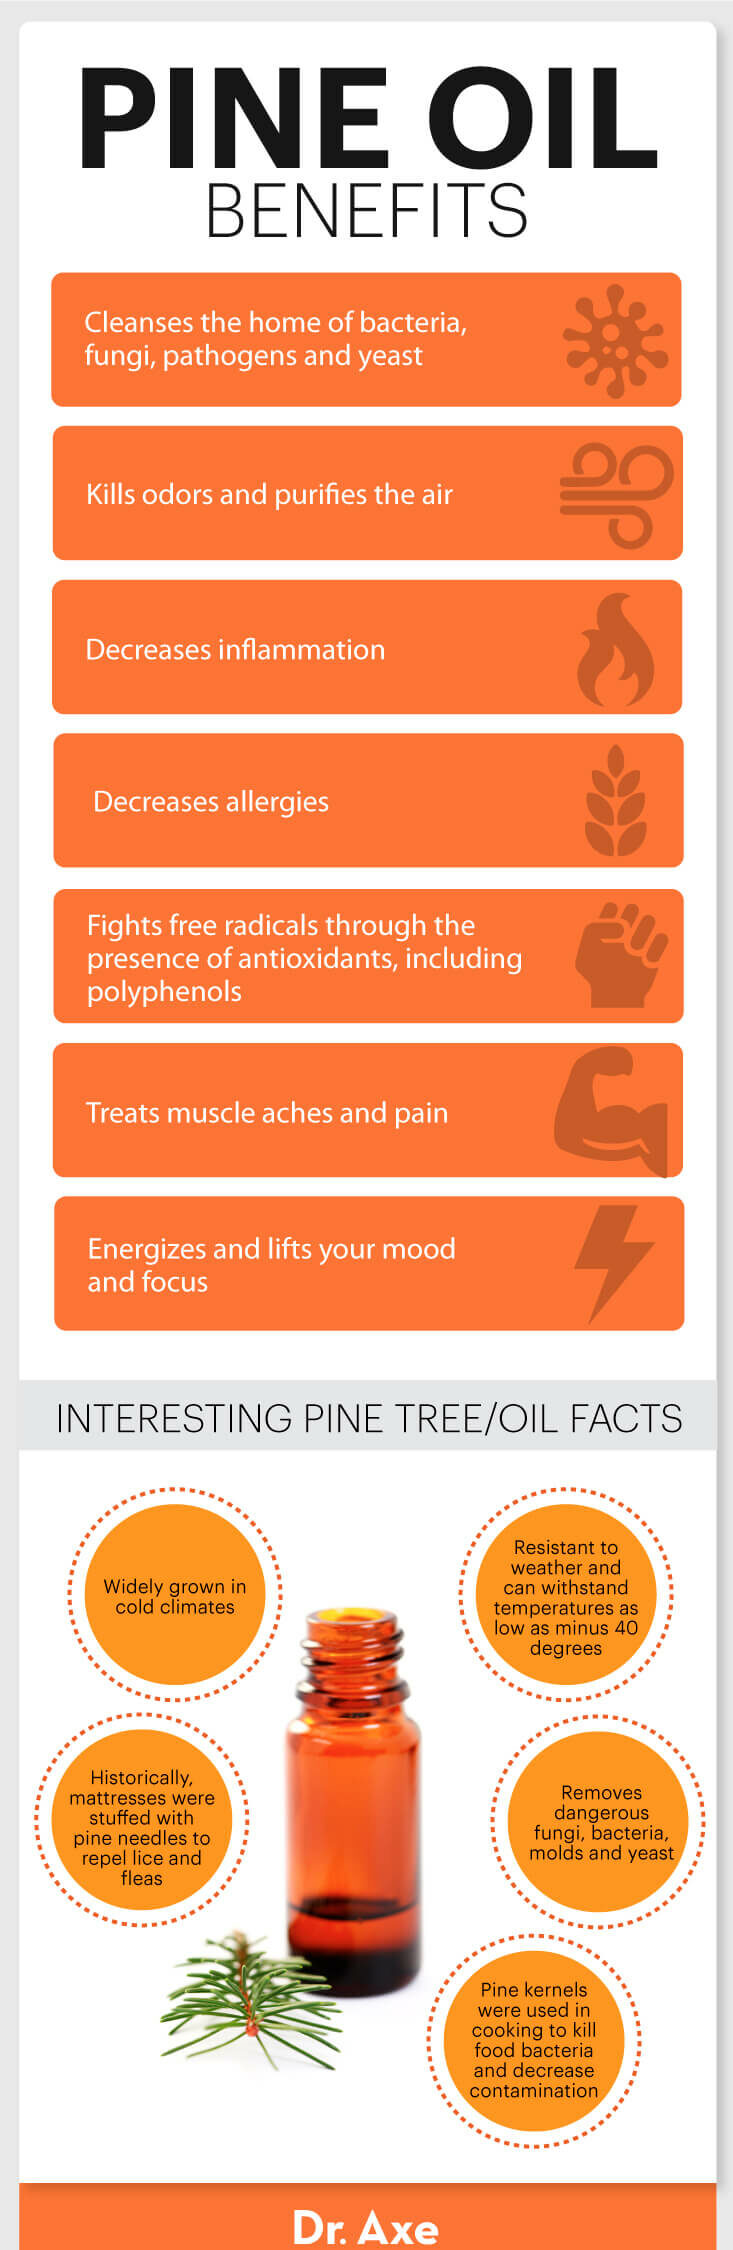 Pine oil uses infographic - Dr. Axe